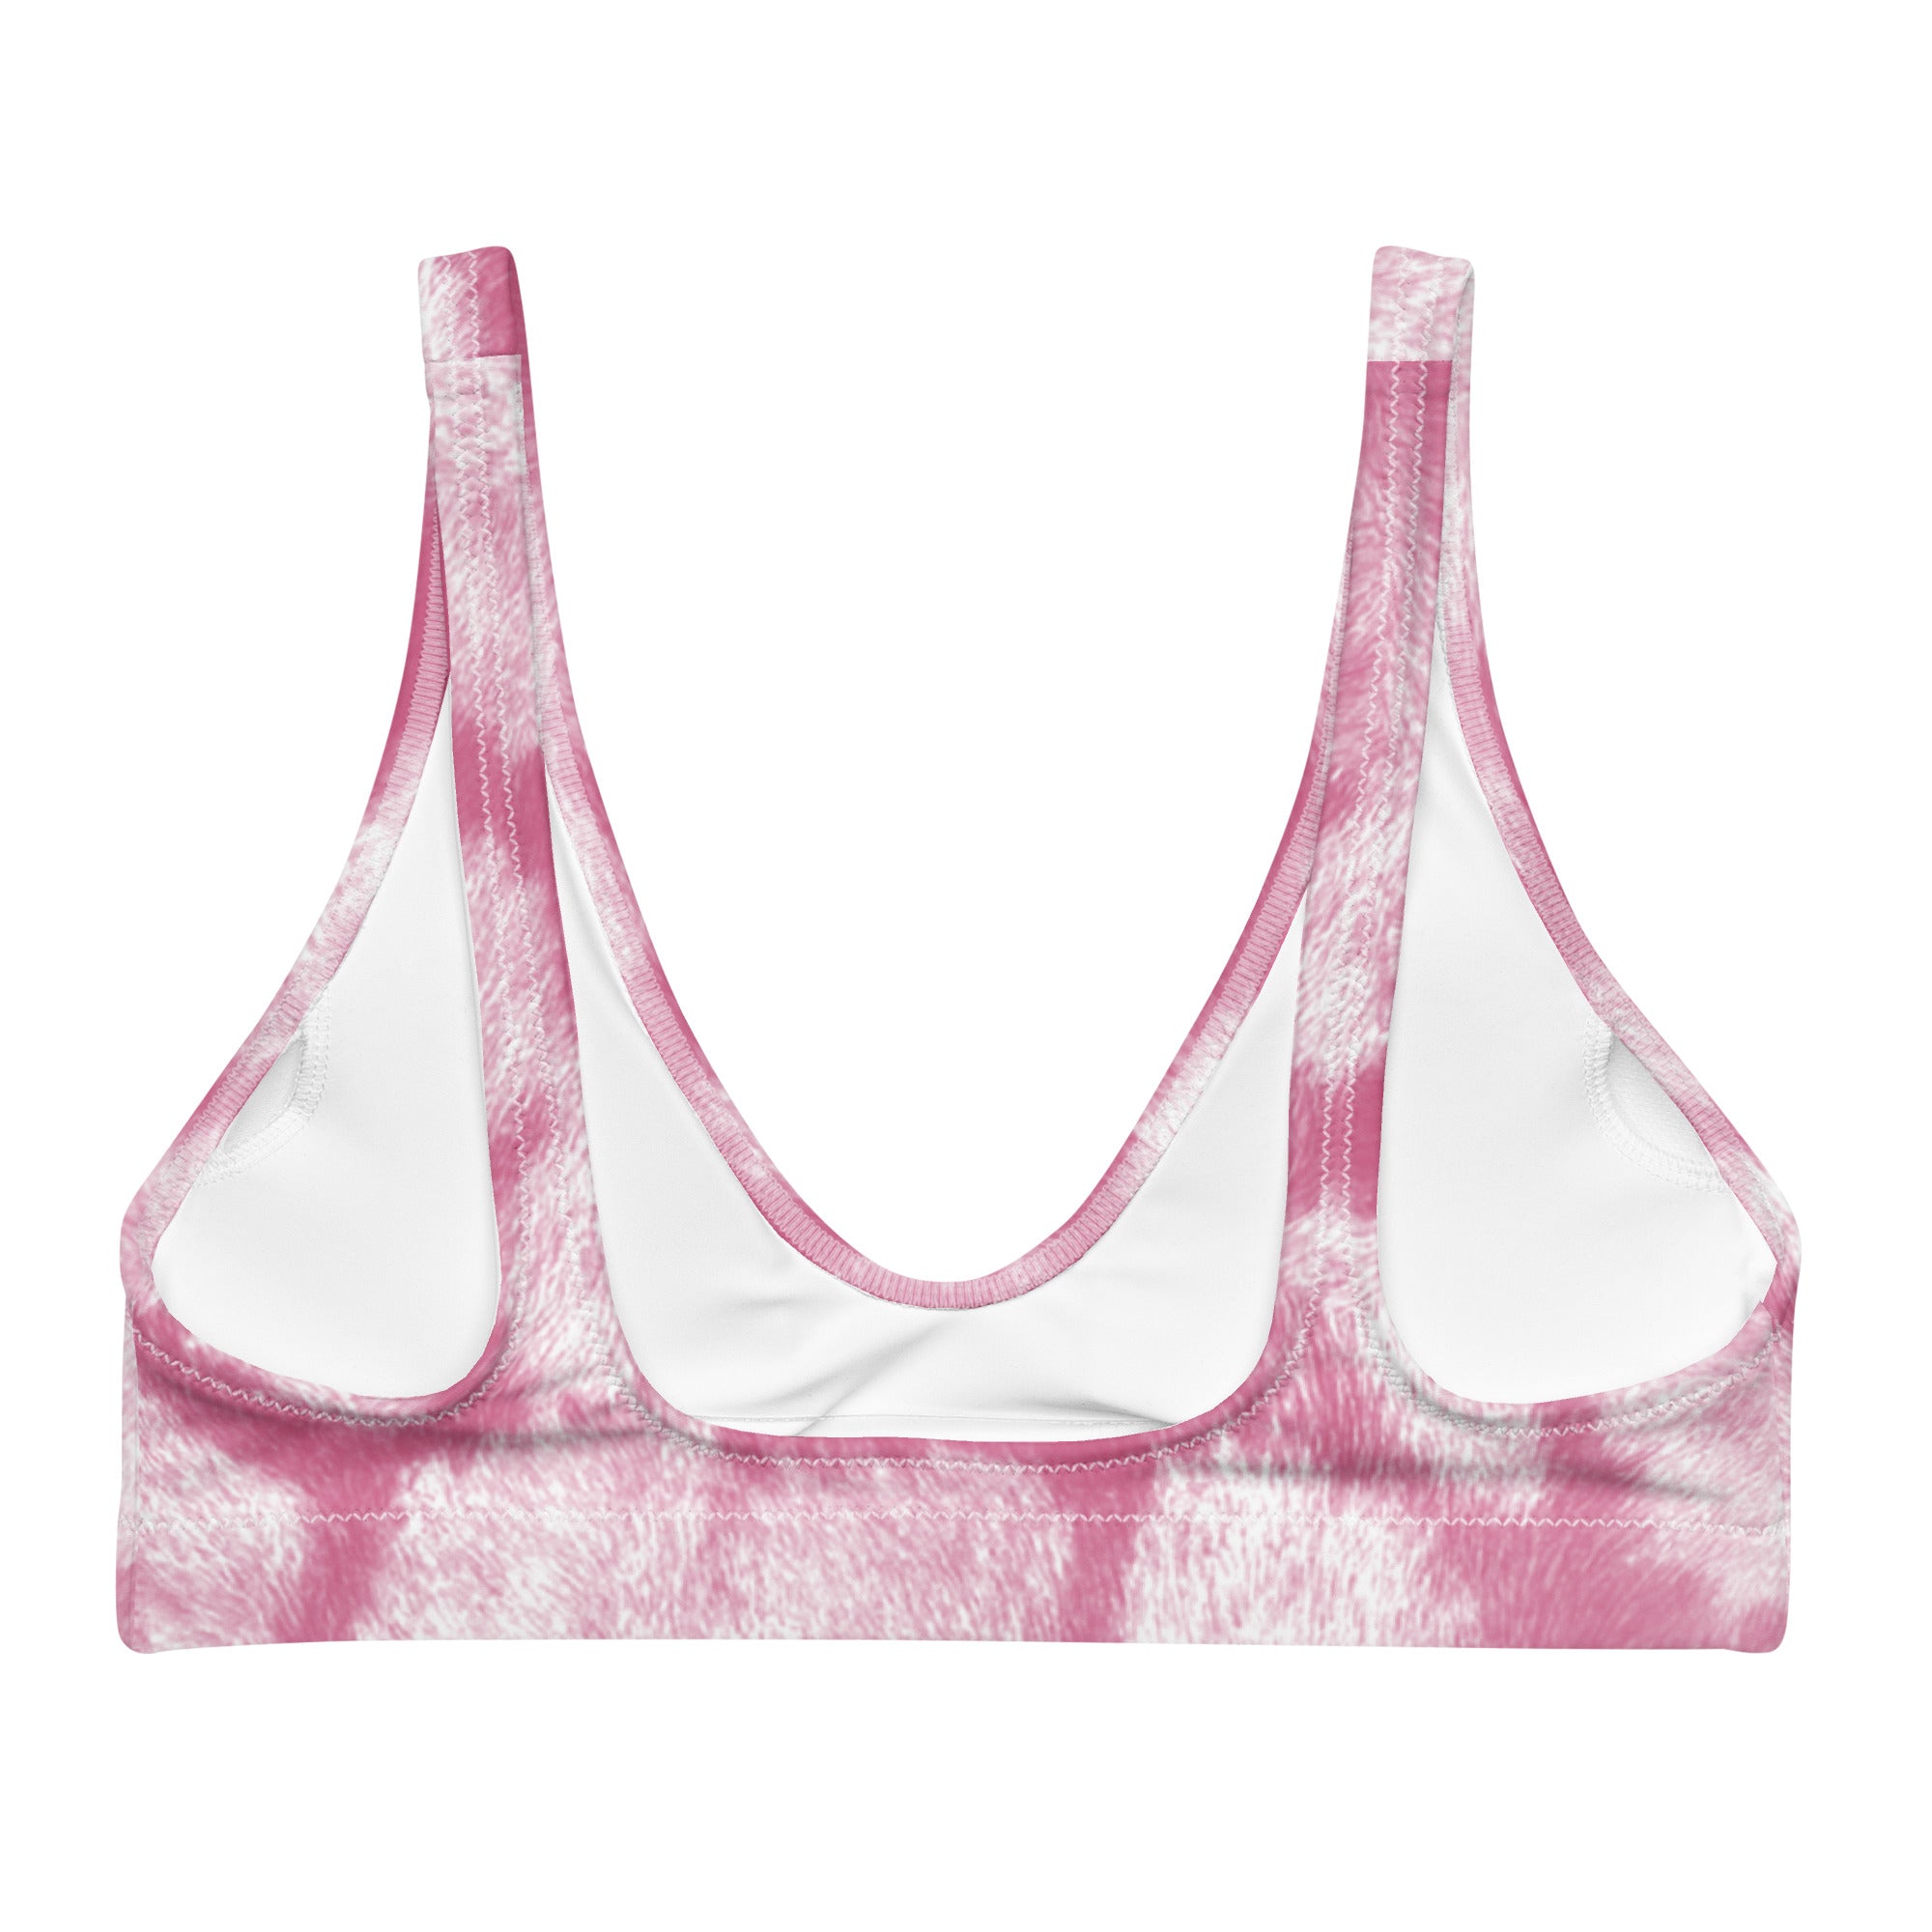 Discover our stylish Pink & White Printed Bikini Top for ladies.